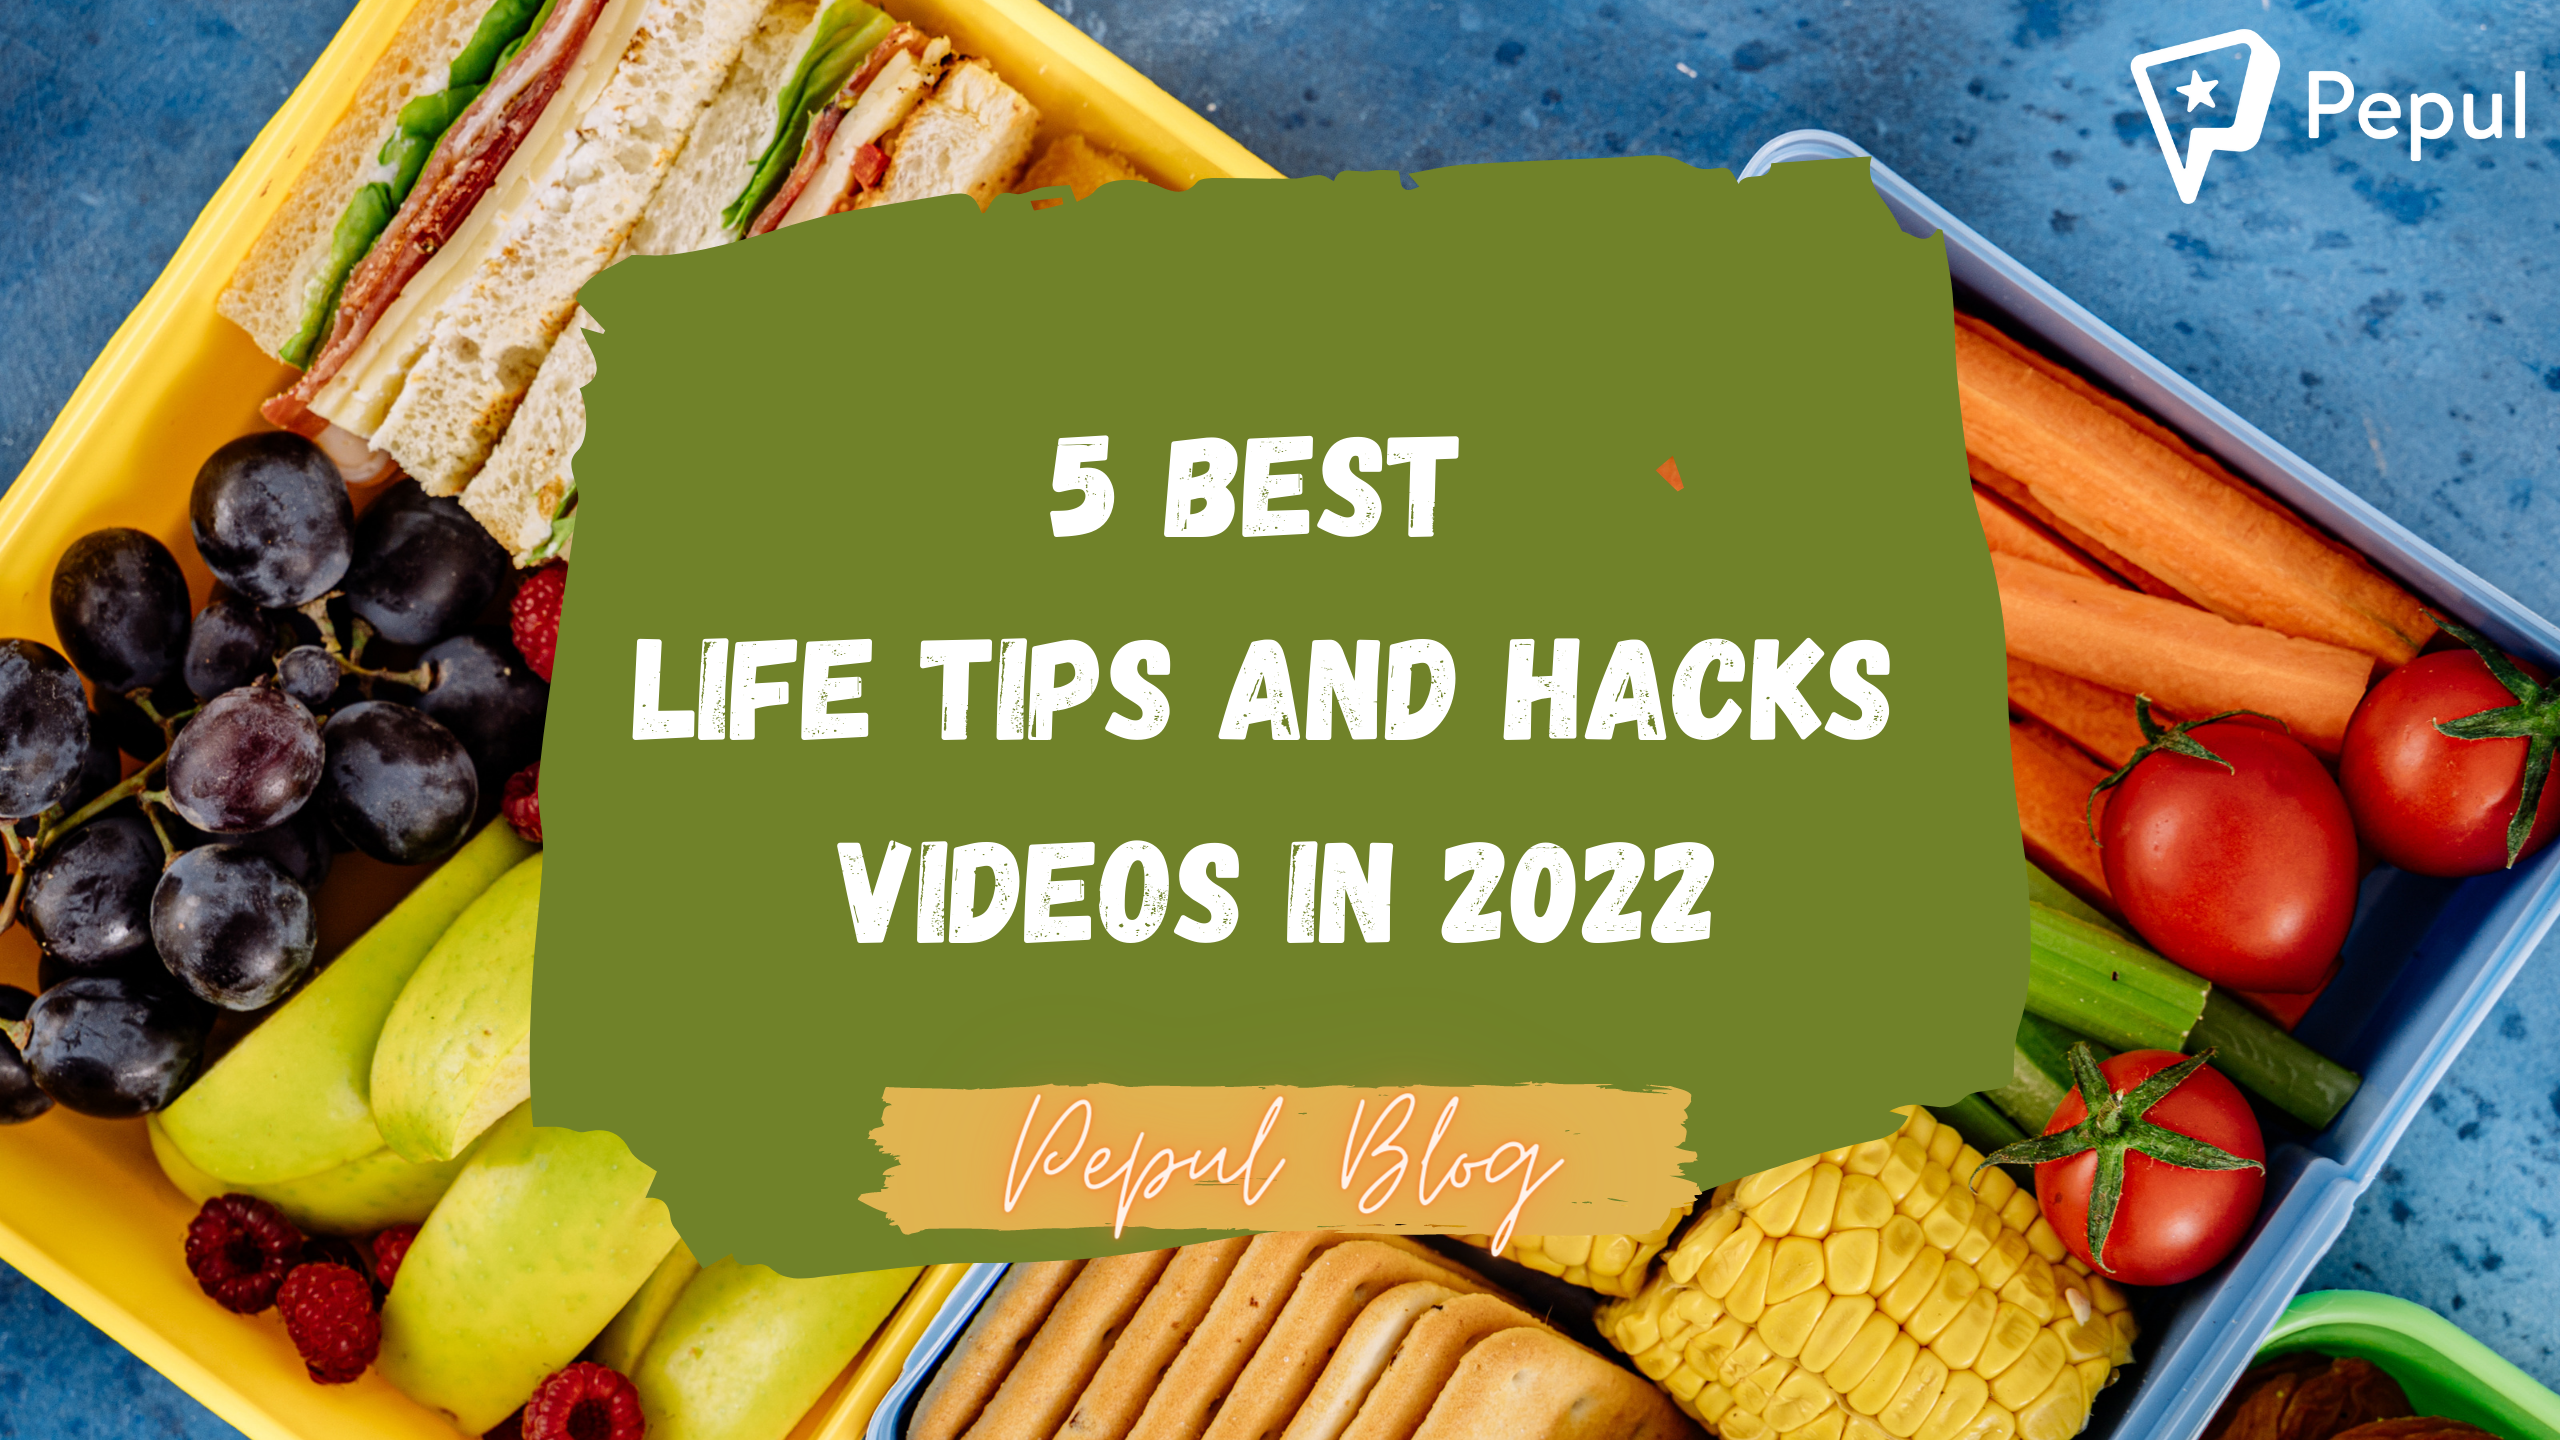 Top 5 Best Life Tips and Hacks Short Videos in 2022